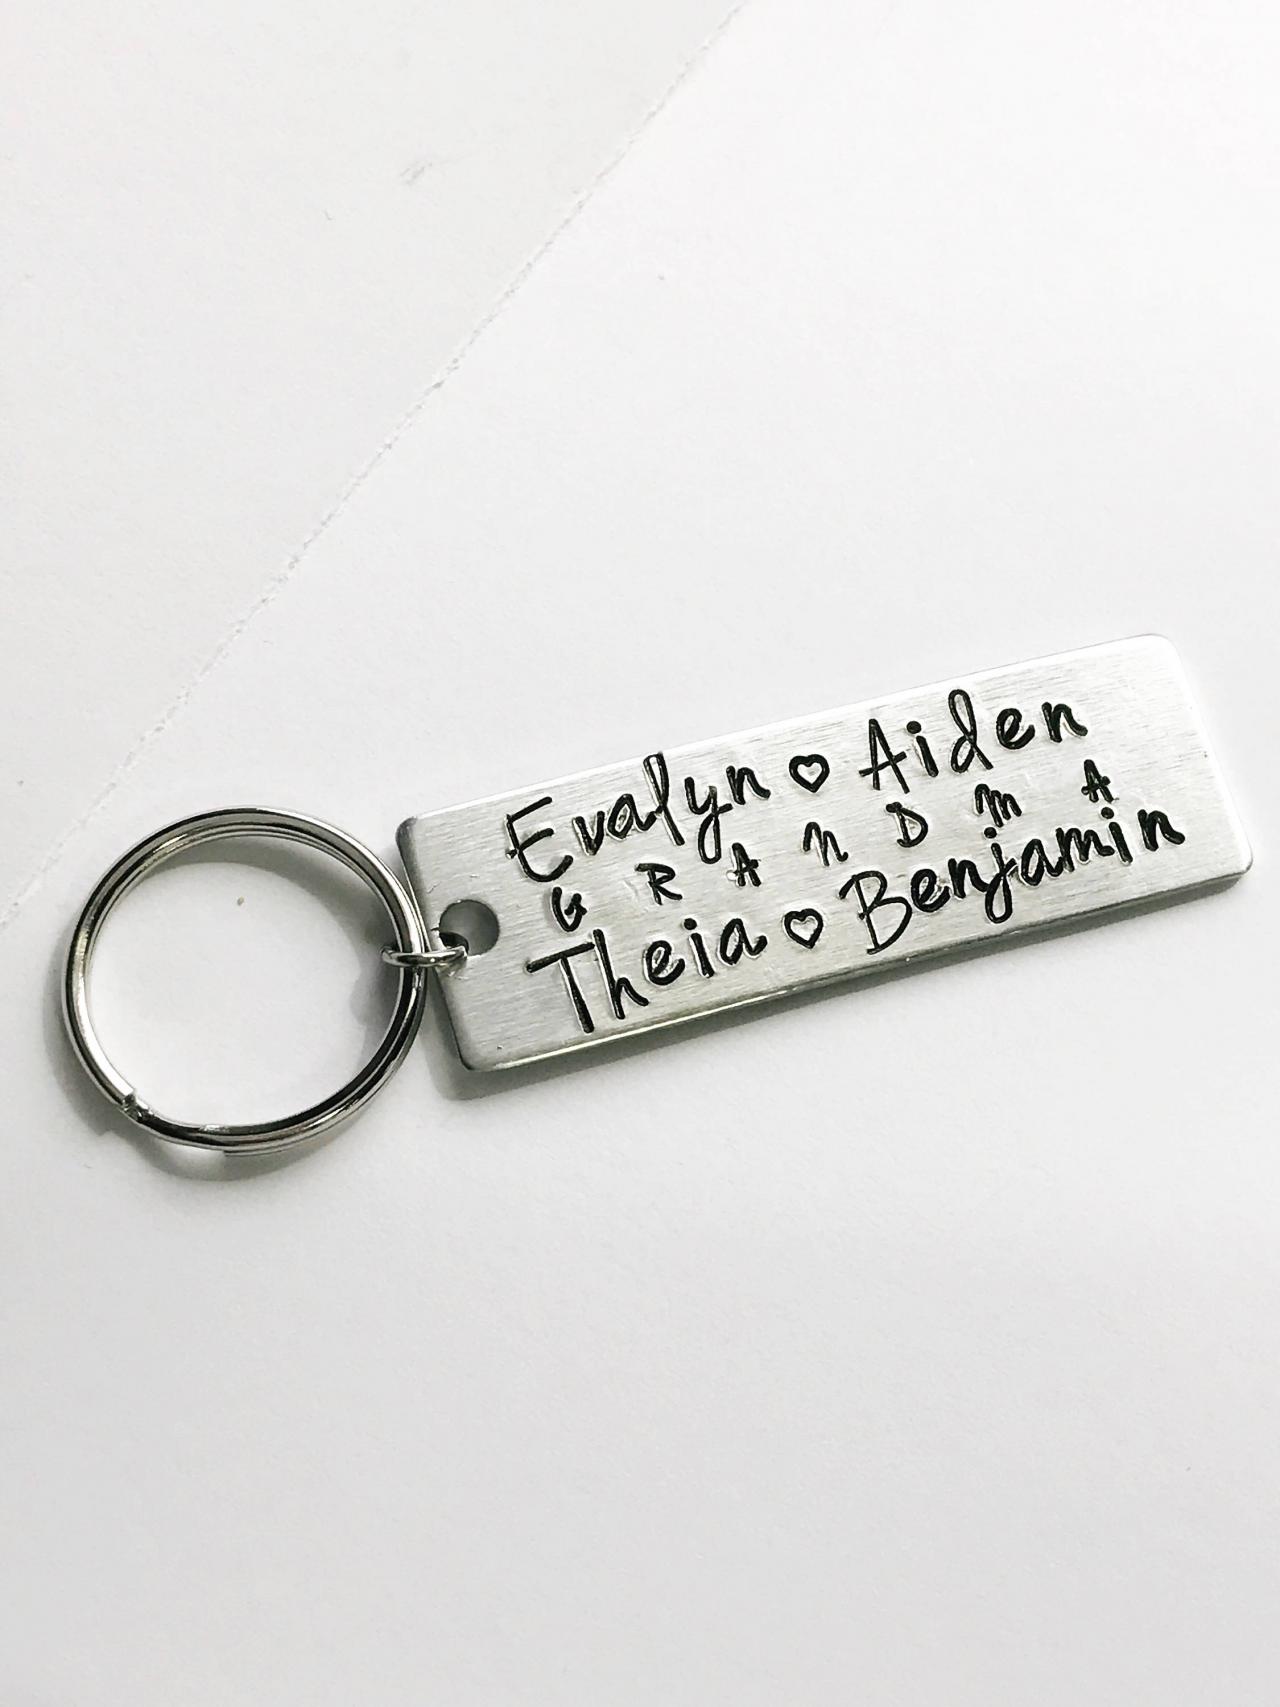 Personalized Grandma or Mom Aluminum Metalstamped Handstamped keychain // Mother's Day dad grandpa gift custom family